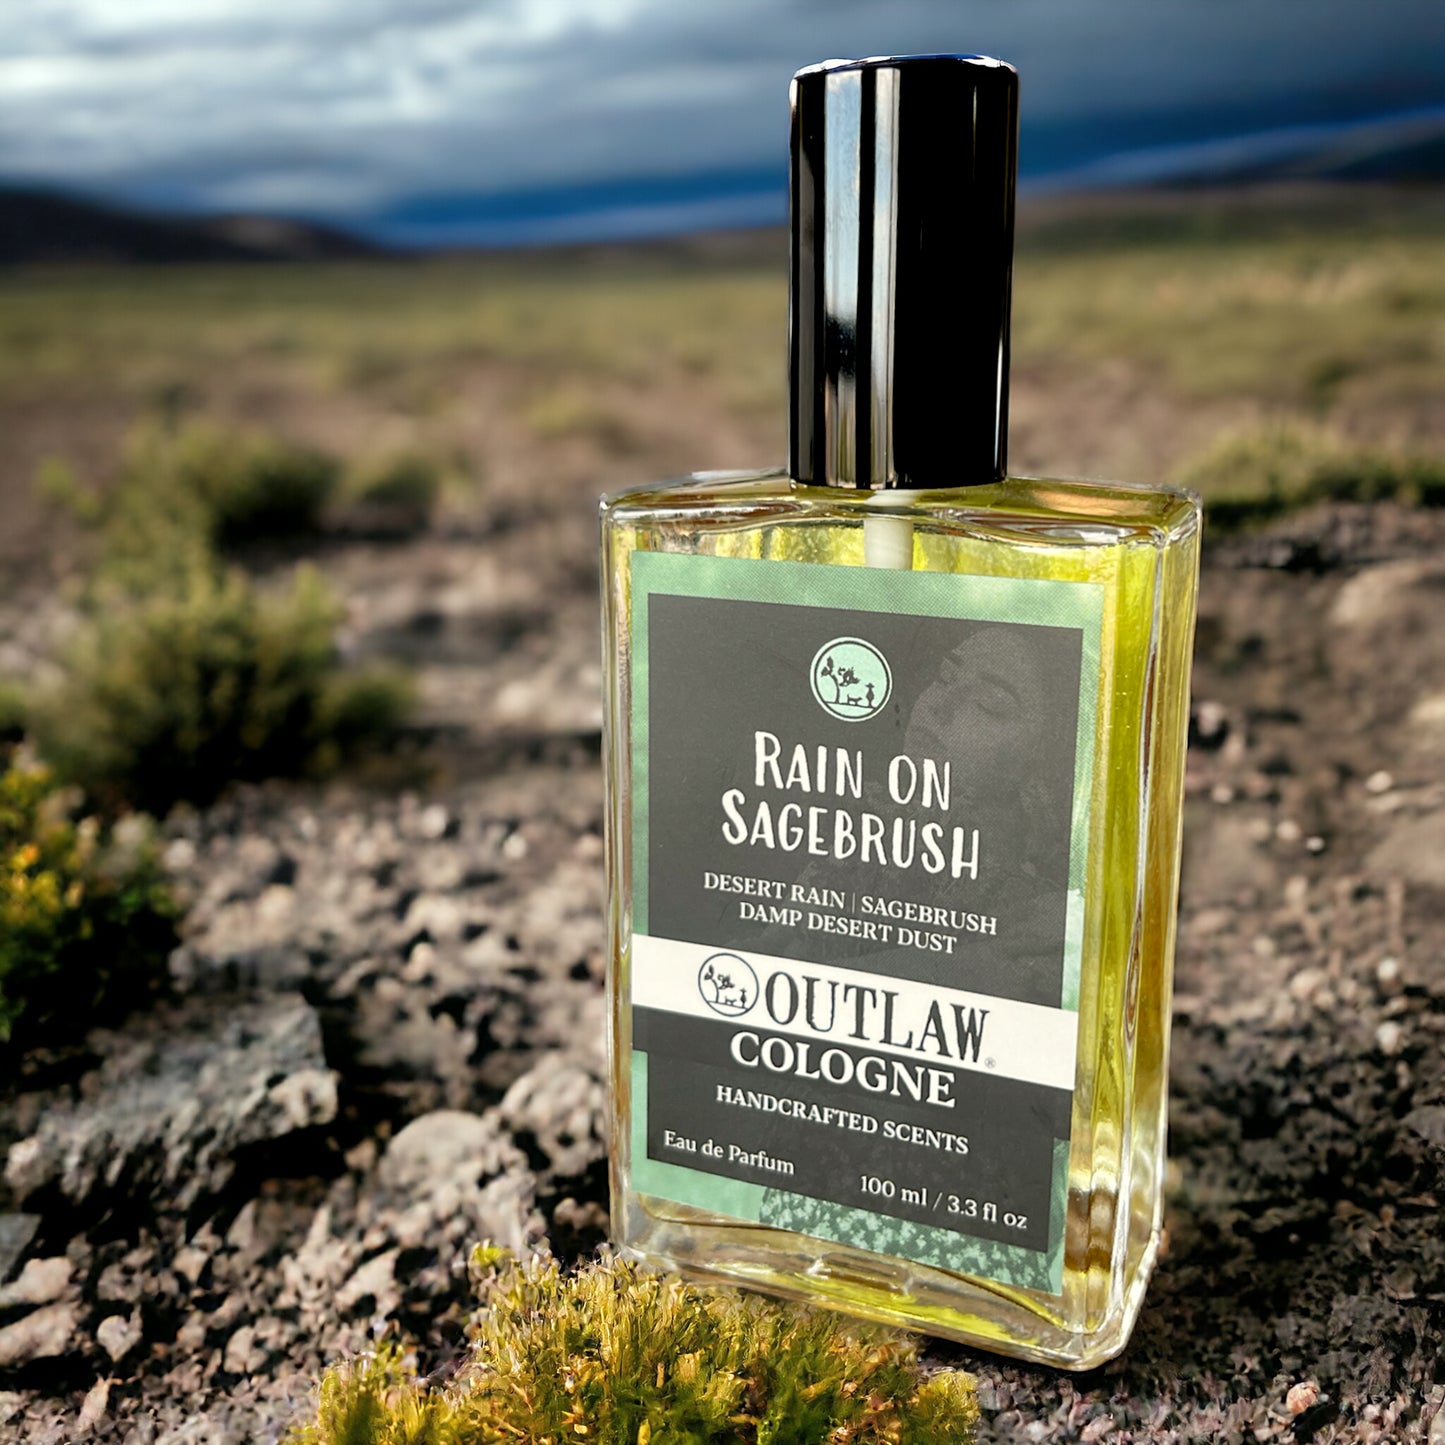 Rain on Sagebrush Cologne: May Scent of the Month